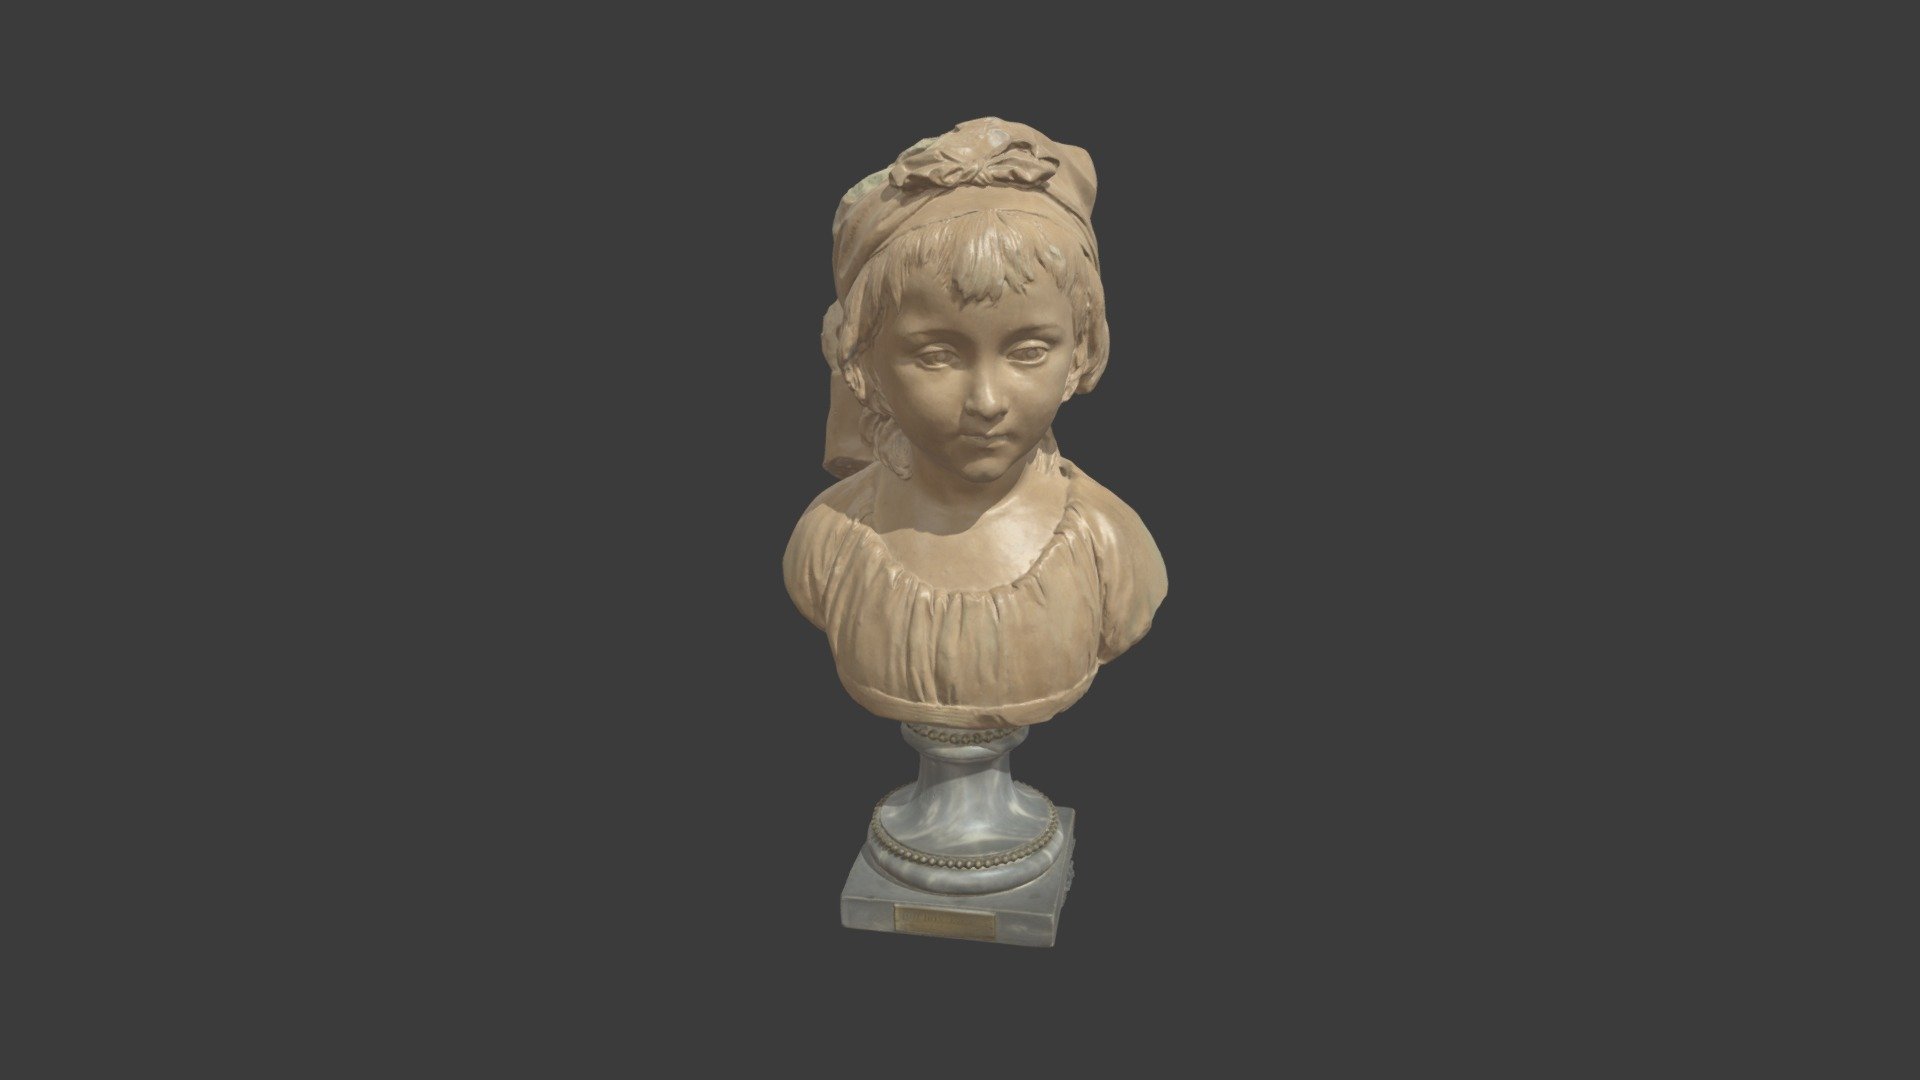 3D scan of a young girl attributed to the French Sculptor Jean Antoine Houdon 1741-1828

More information about the scultpor found here.
https://www.metmuseum.org/toah/hd/jahd/hd_jahd.htm

3D scan completed as part of a conservation project with the object undertaken by Lincoln Conservation situated in the University of Lincoln
https://www.lincolnconservation.co.uk/

3D scanner used Artec Spider - Jean Antoine Houdon Sculpture - 3D model by Designblok 3d model